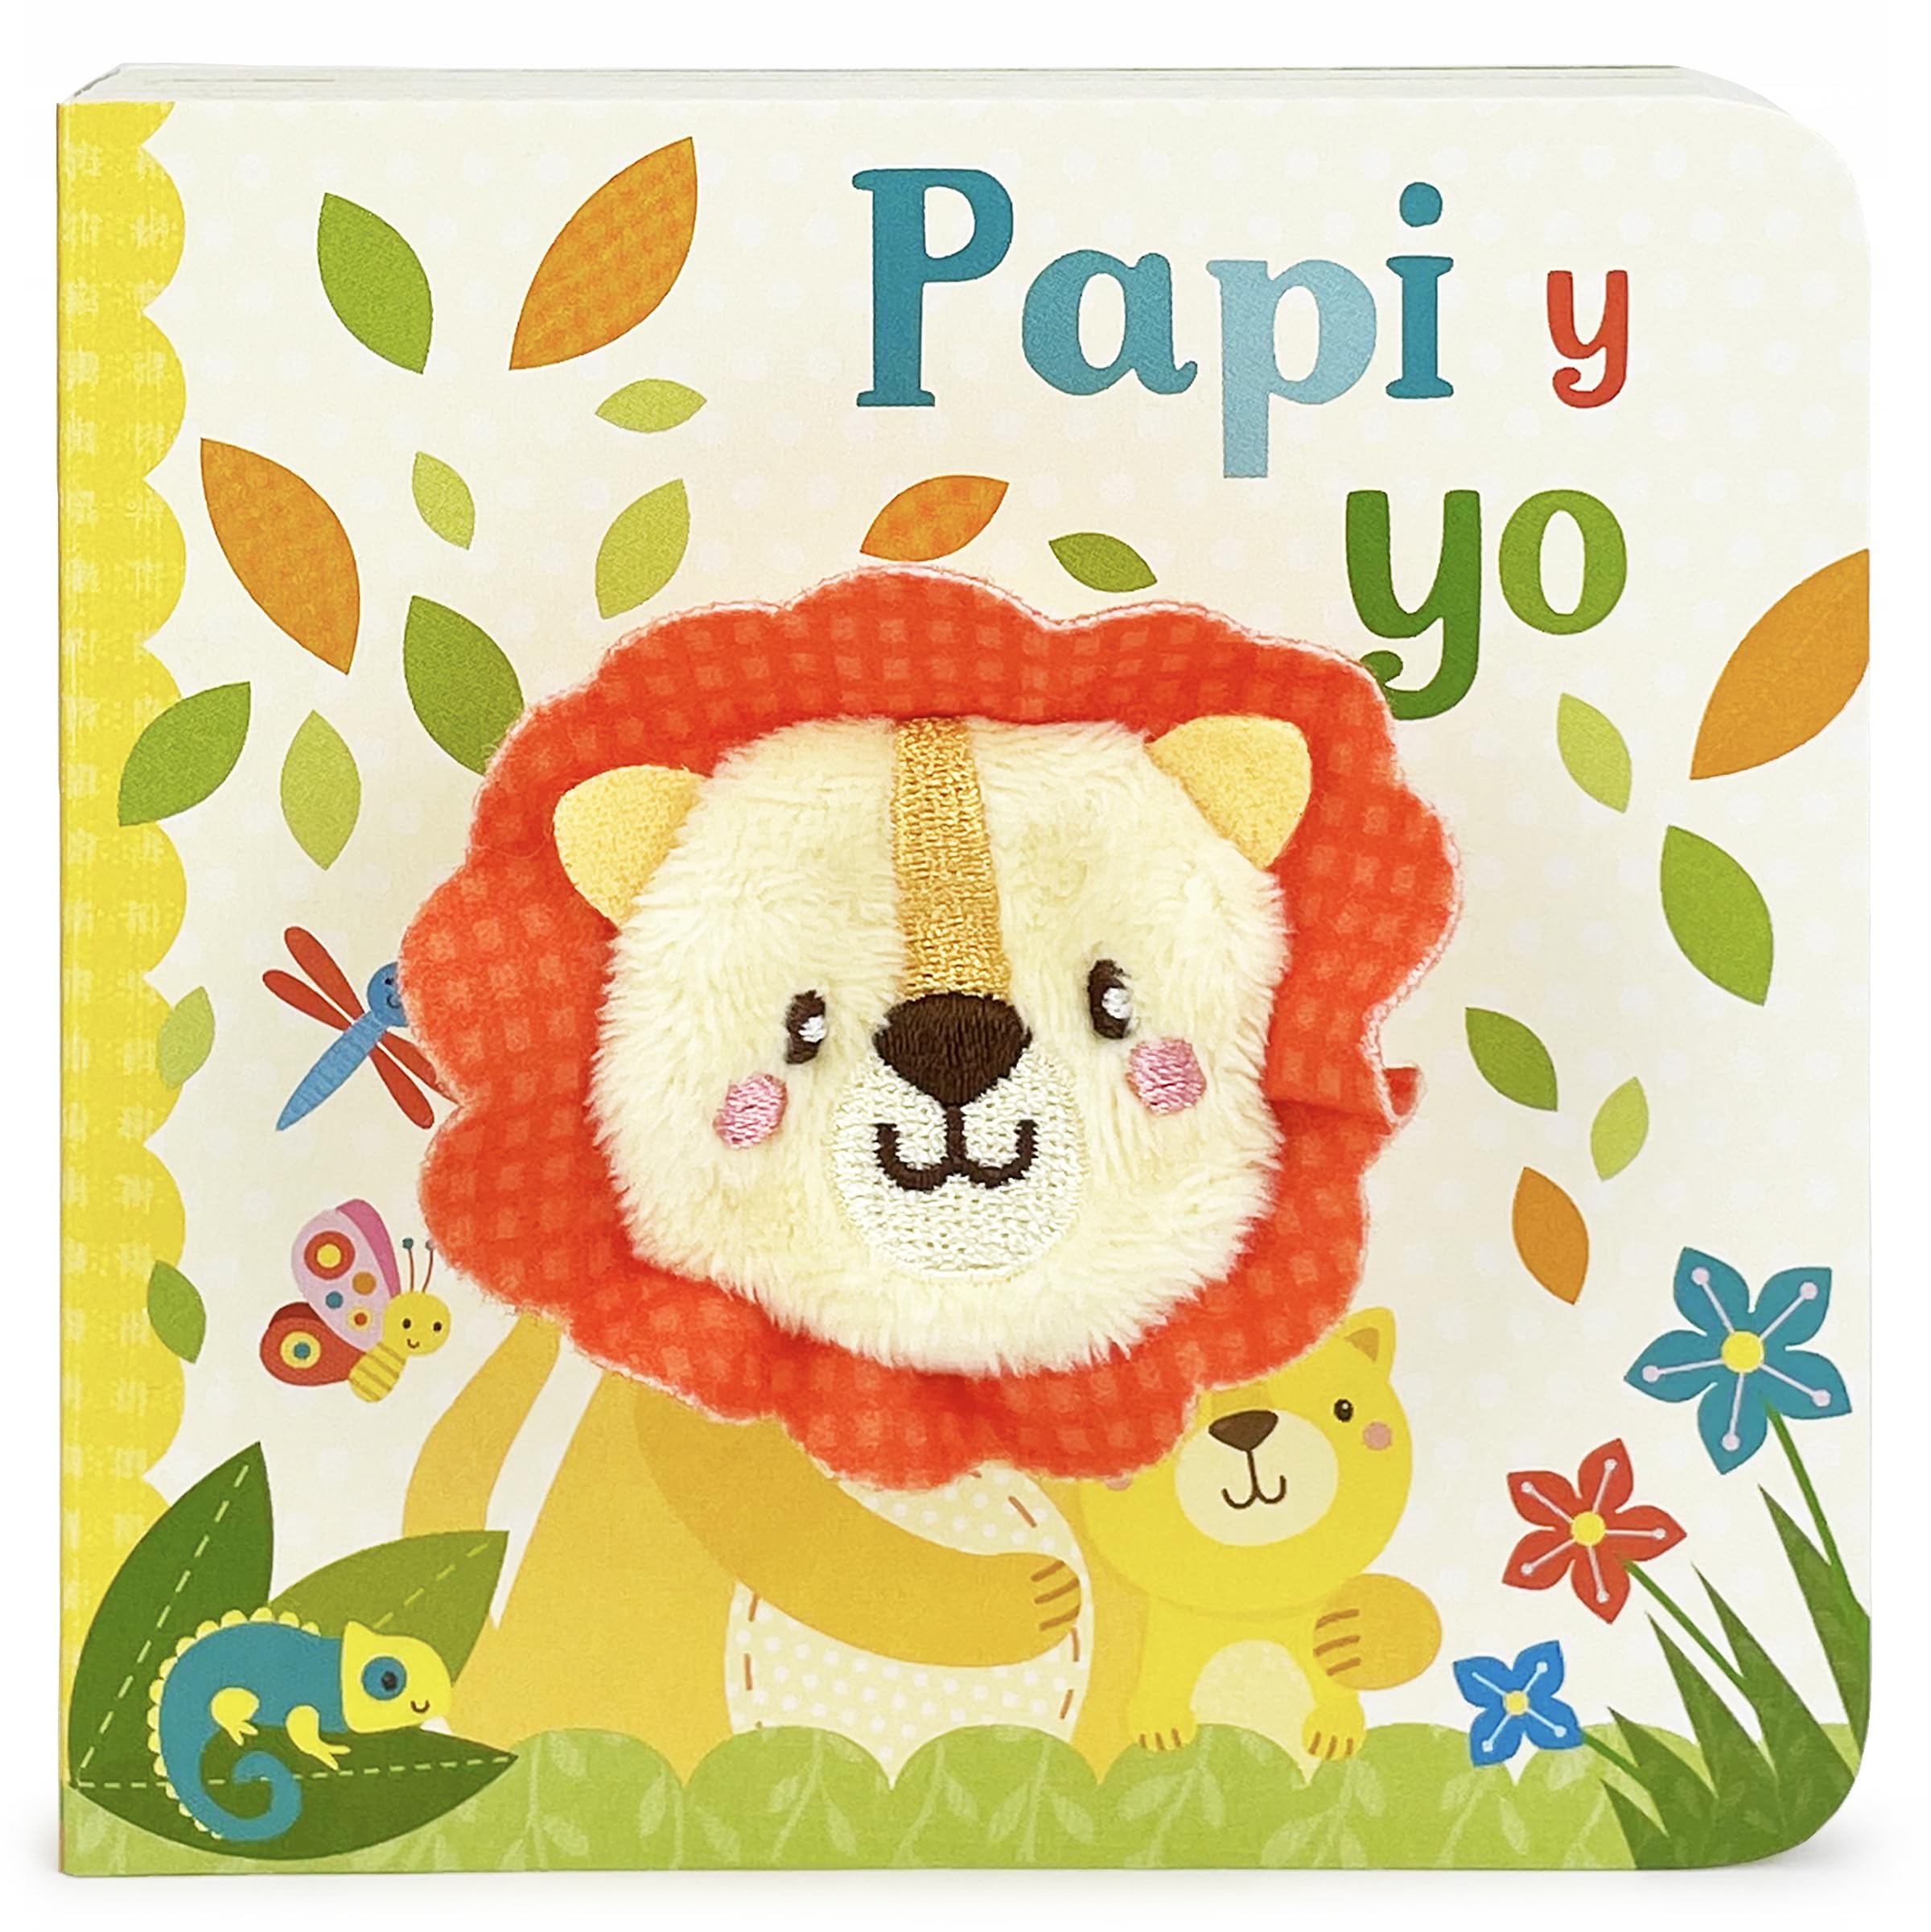 Daddy And Me / Papi y Yo Spanish Language Children's Finger Puppet Board Book, Ages 1-4 (en español)